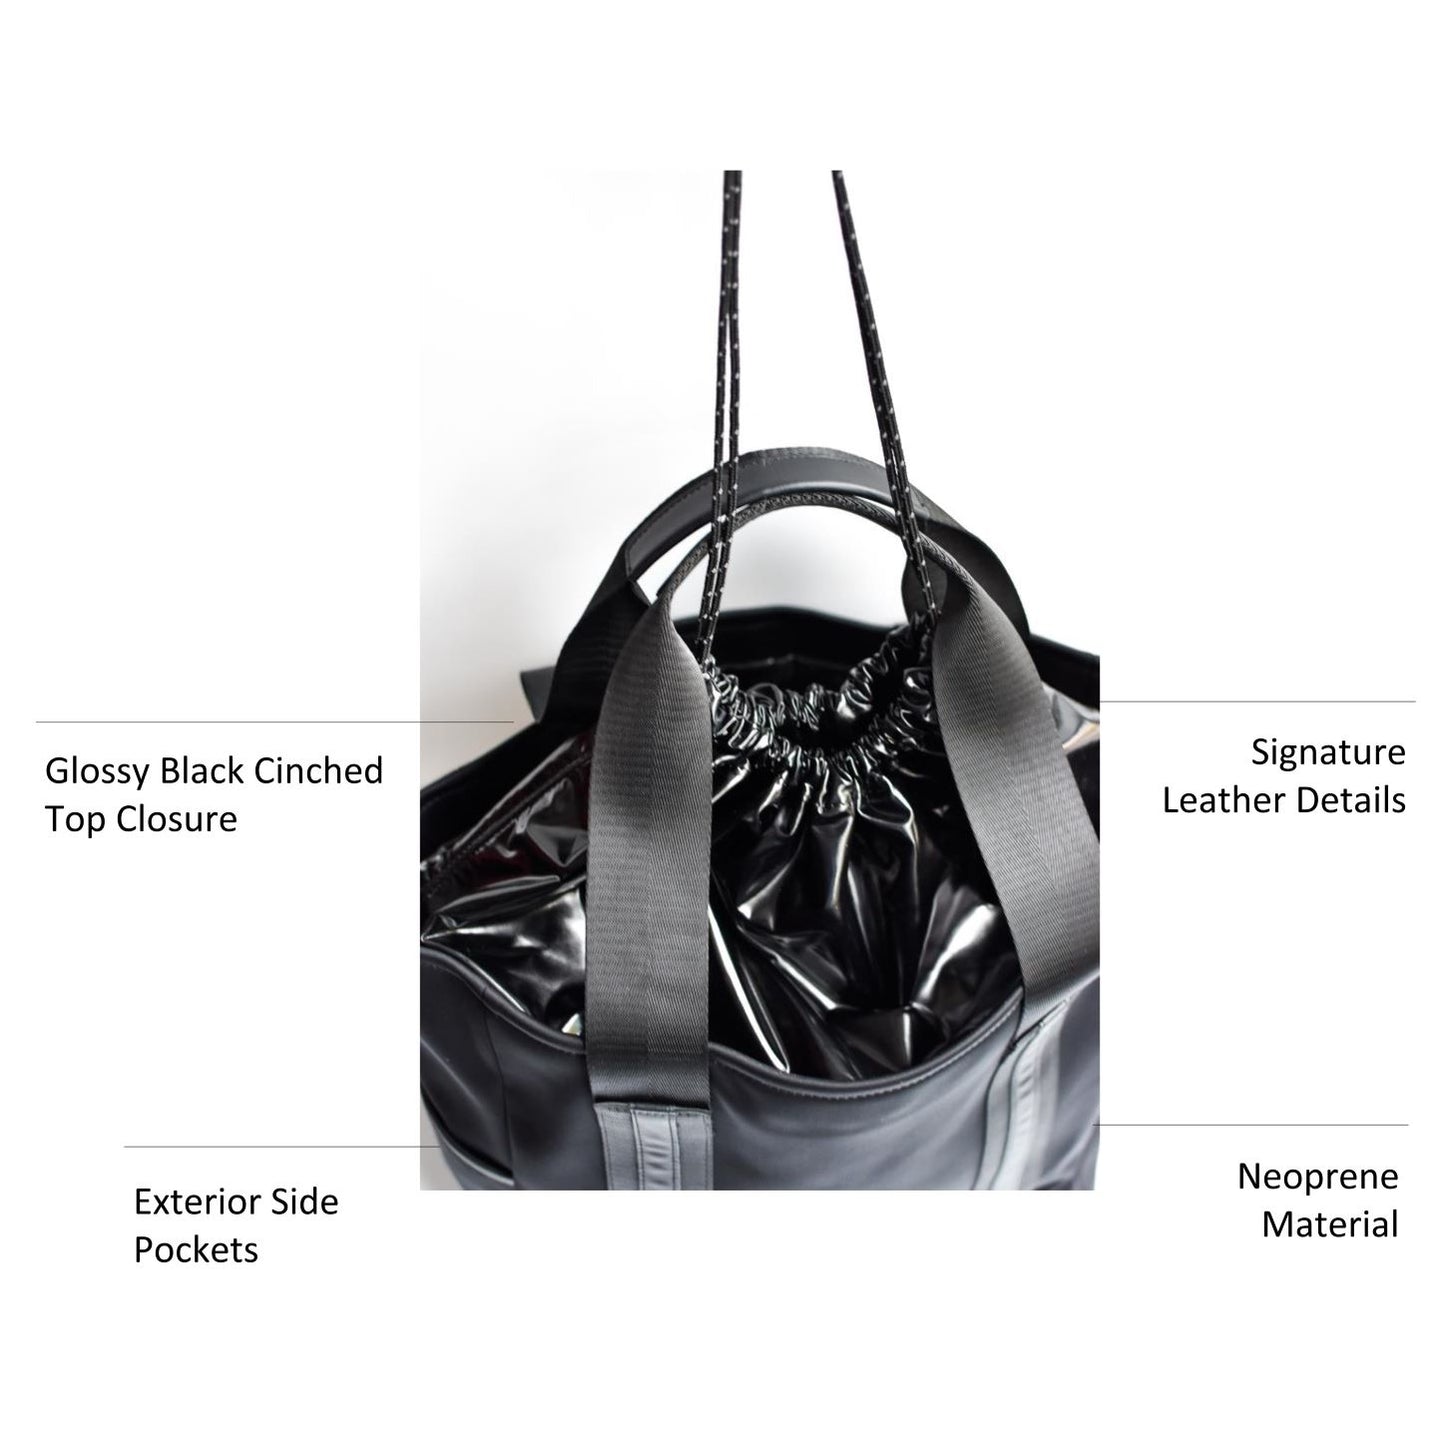 Black neoprene tote bag with high shine cinch top closure and leather details